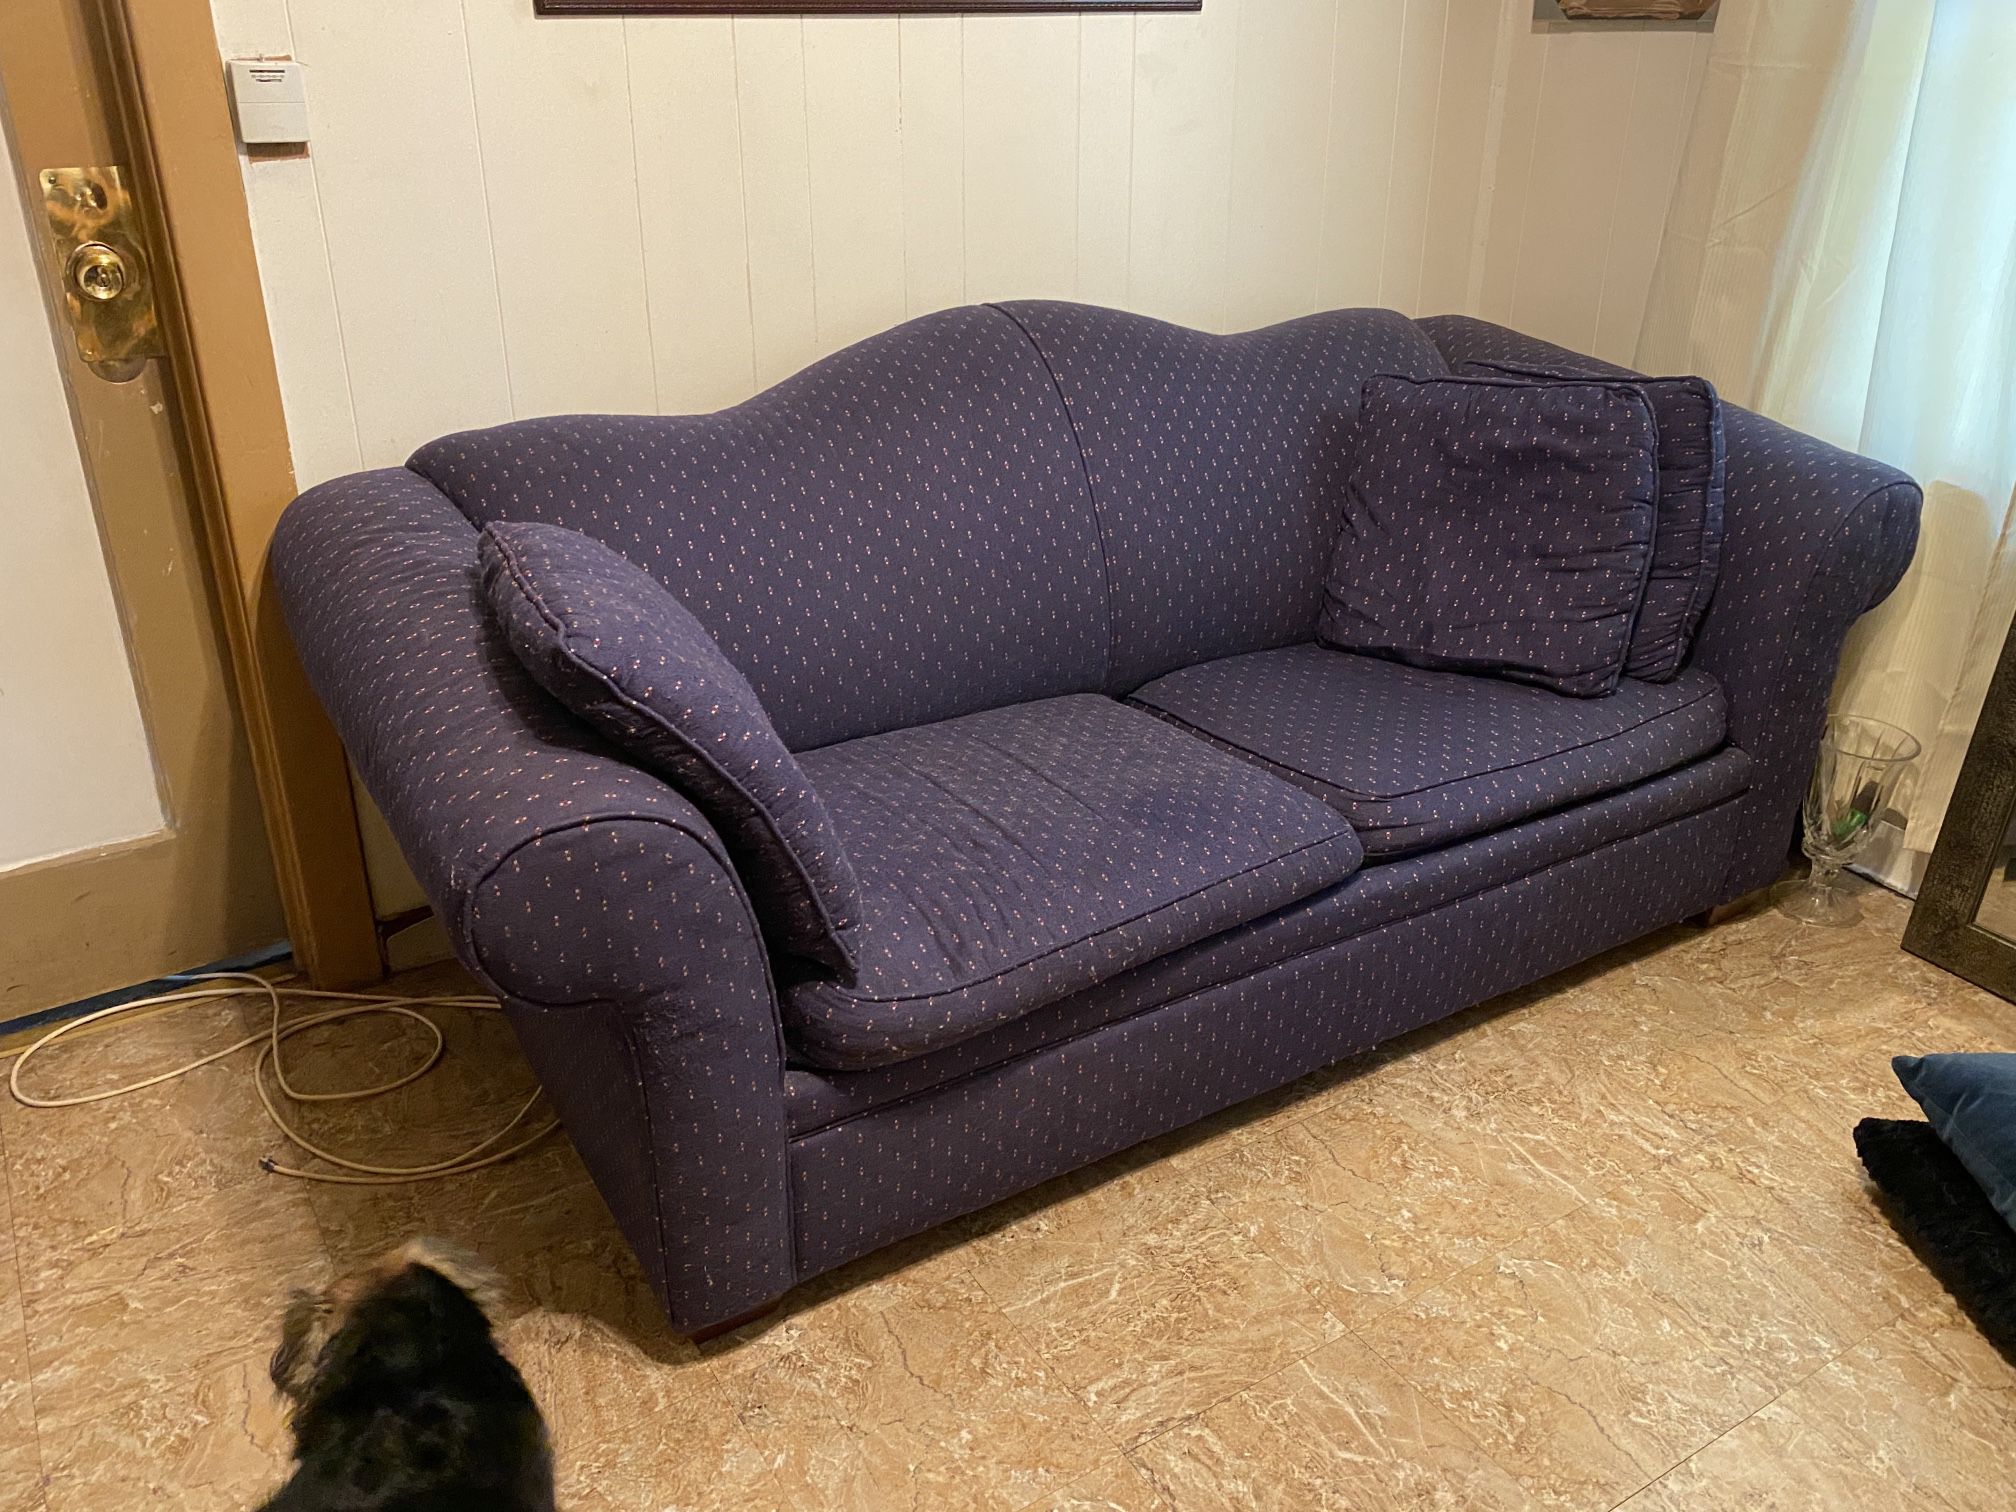 Couch Free Navy Blue